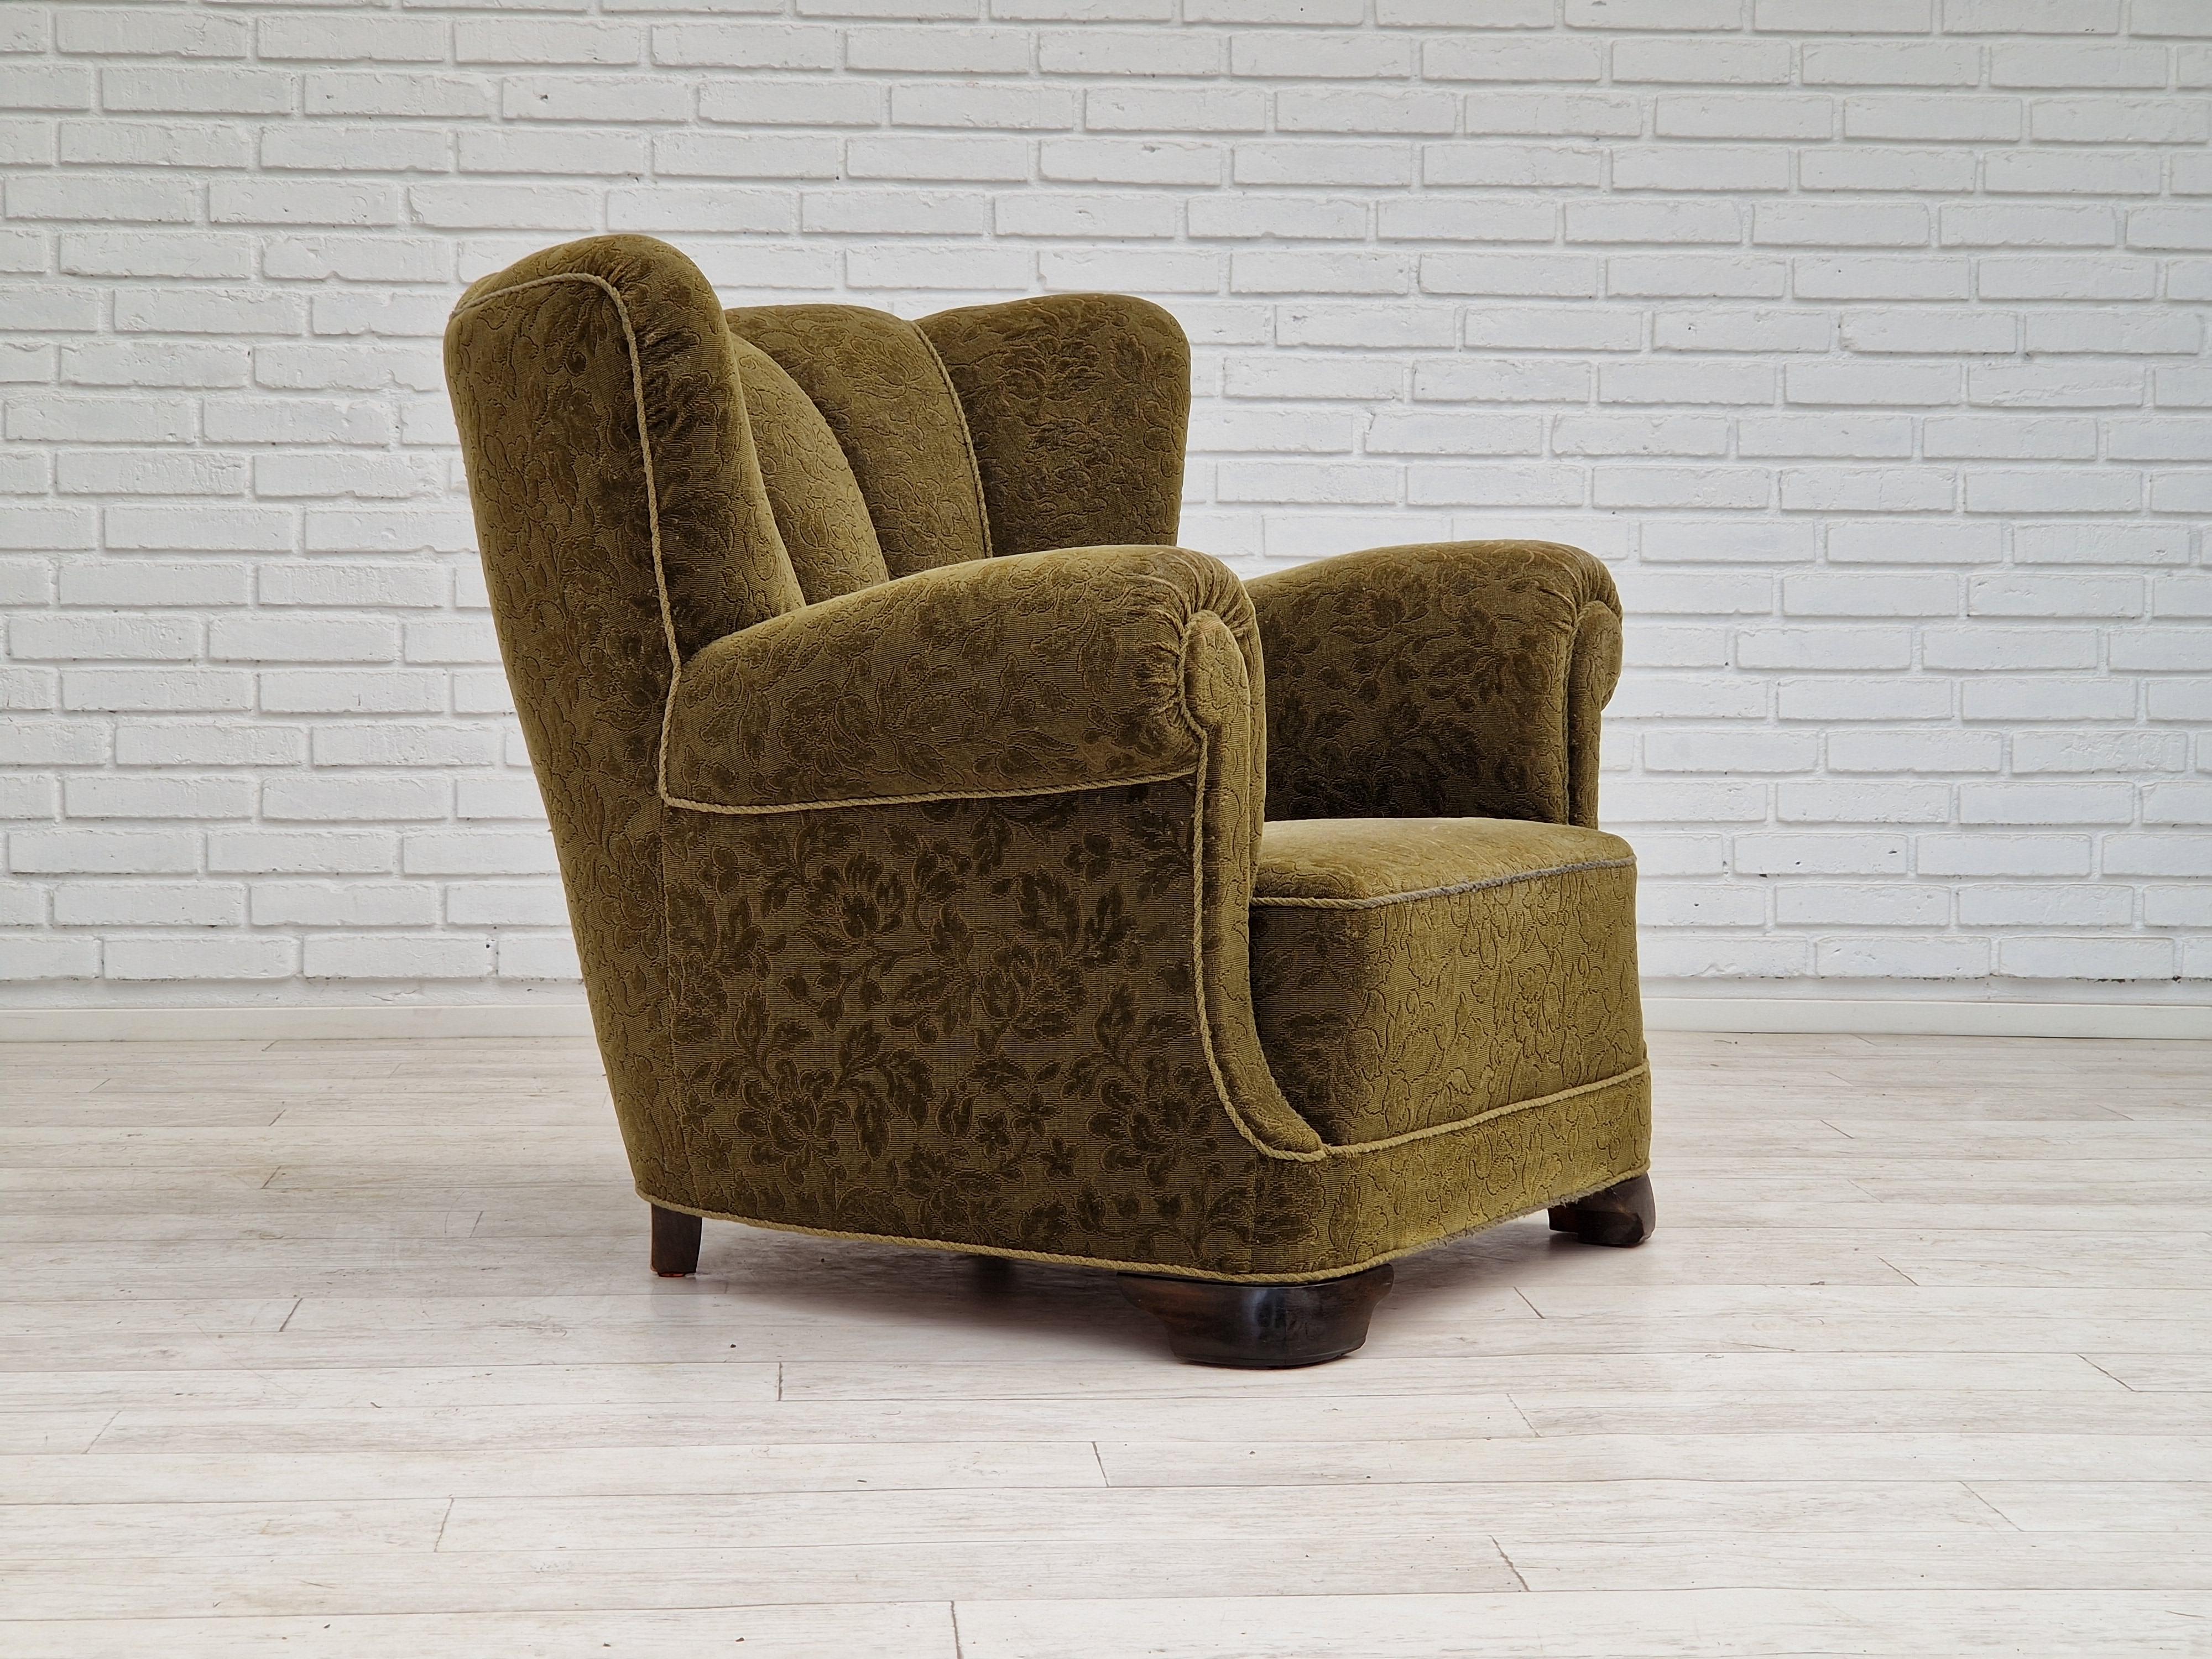 1950s, Danish design. Original relax chair in green fabric. Good condition: no smells and no stains, light wear/ patina on the top back and armrest. Brass springs in the seat. Made by Danish furniture manufacturer in about 1950-55.